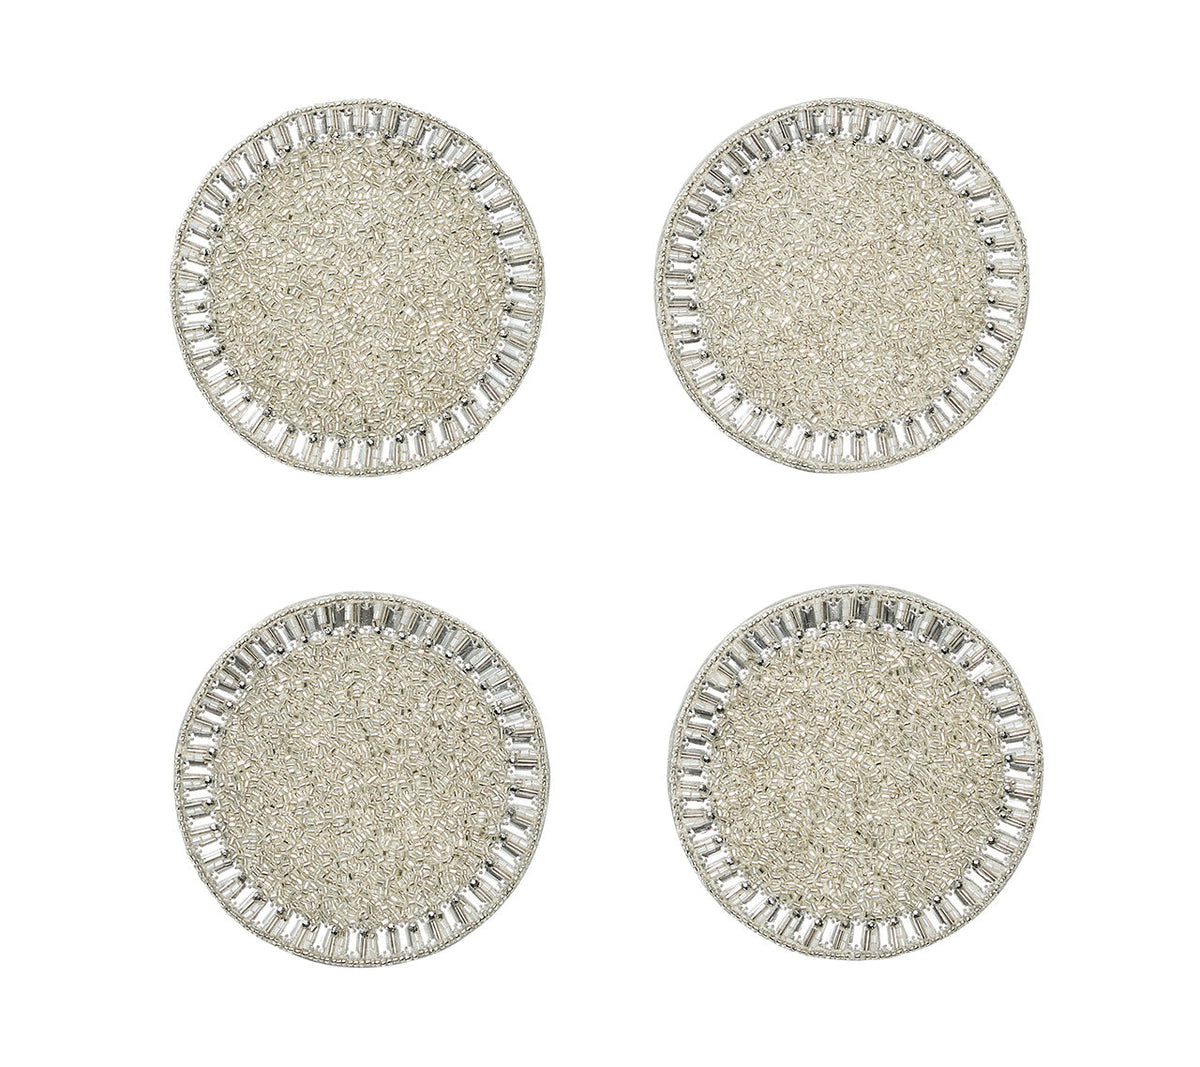 Lumina Coasters in White, Set of 4 in a Gift Bag